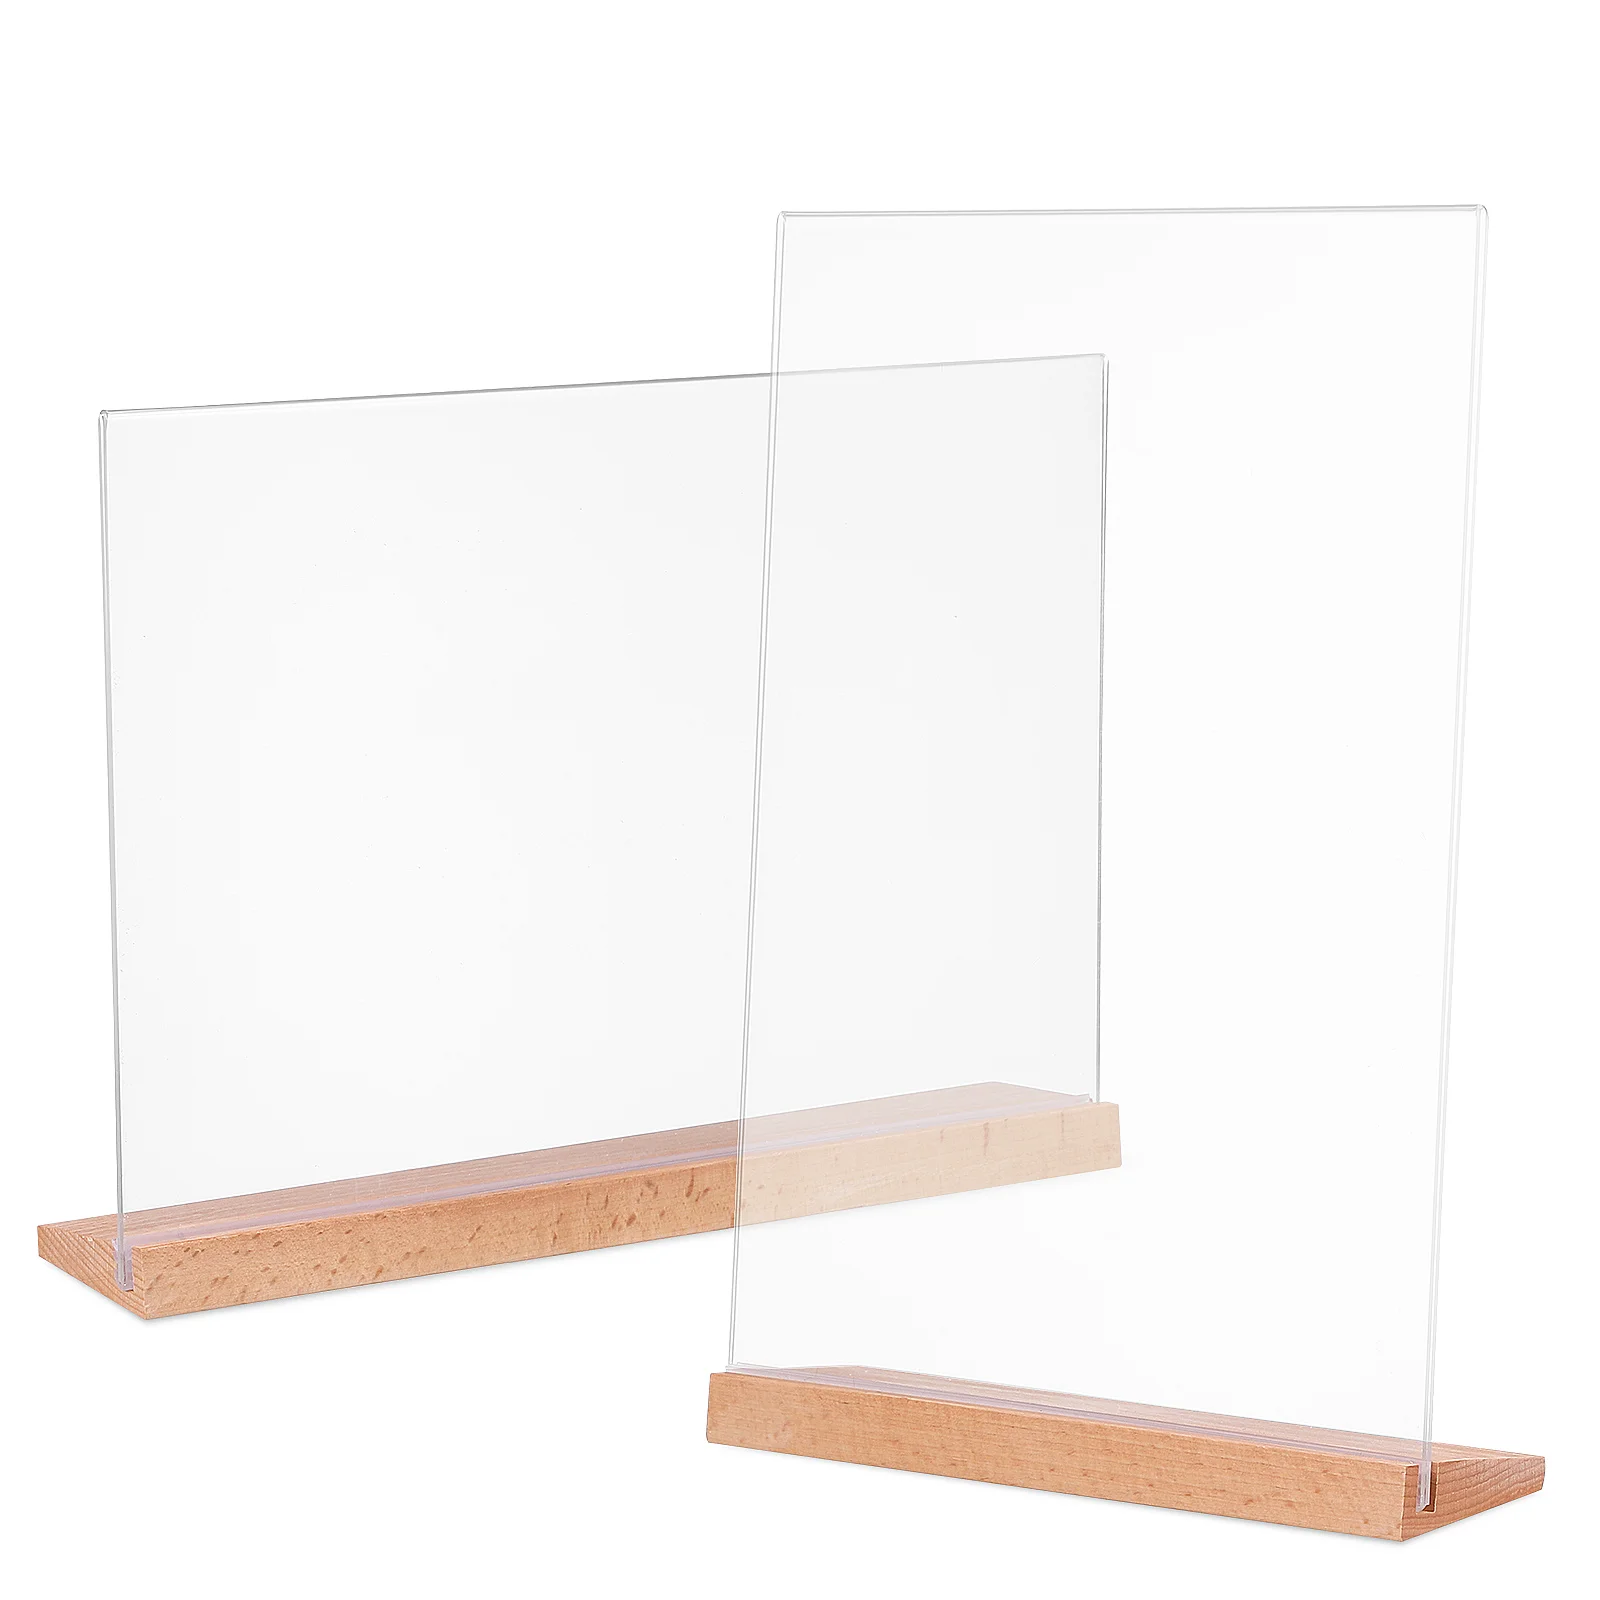 

2pcs Acrylic Sign Holders Clear Menu Stands Document Brochure Price Tag Display Holders